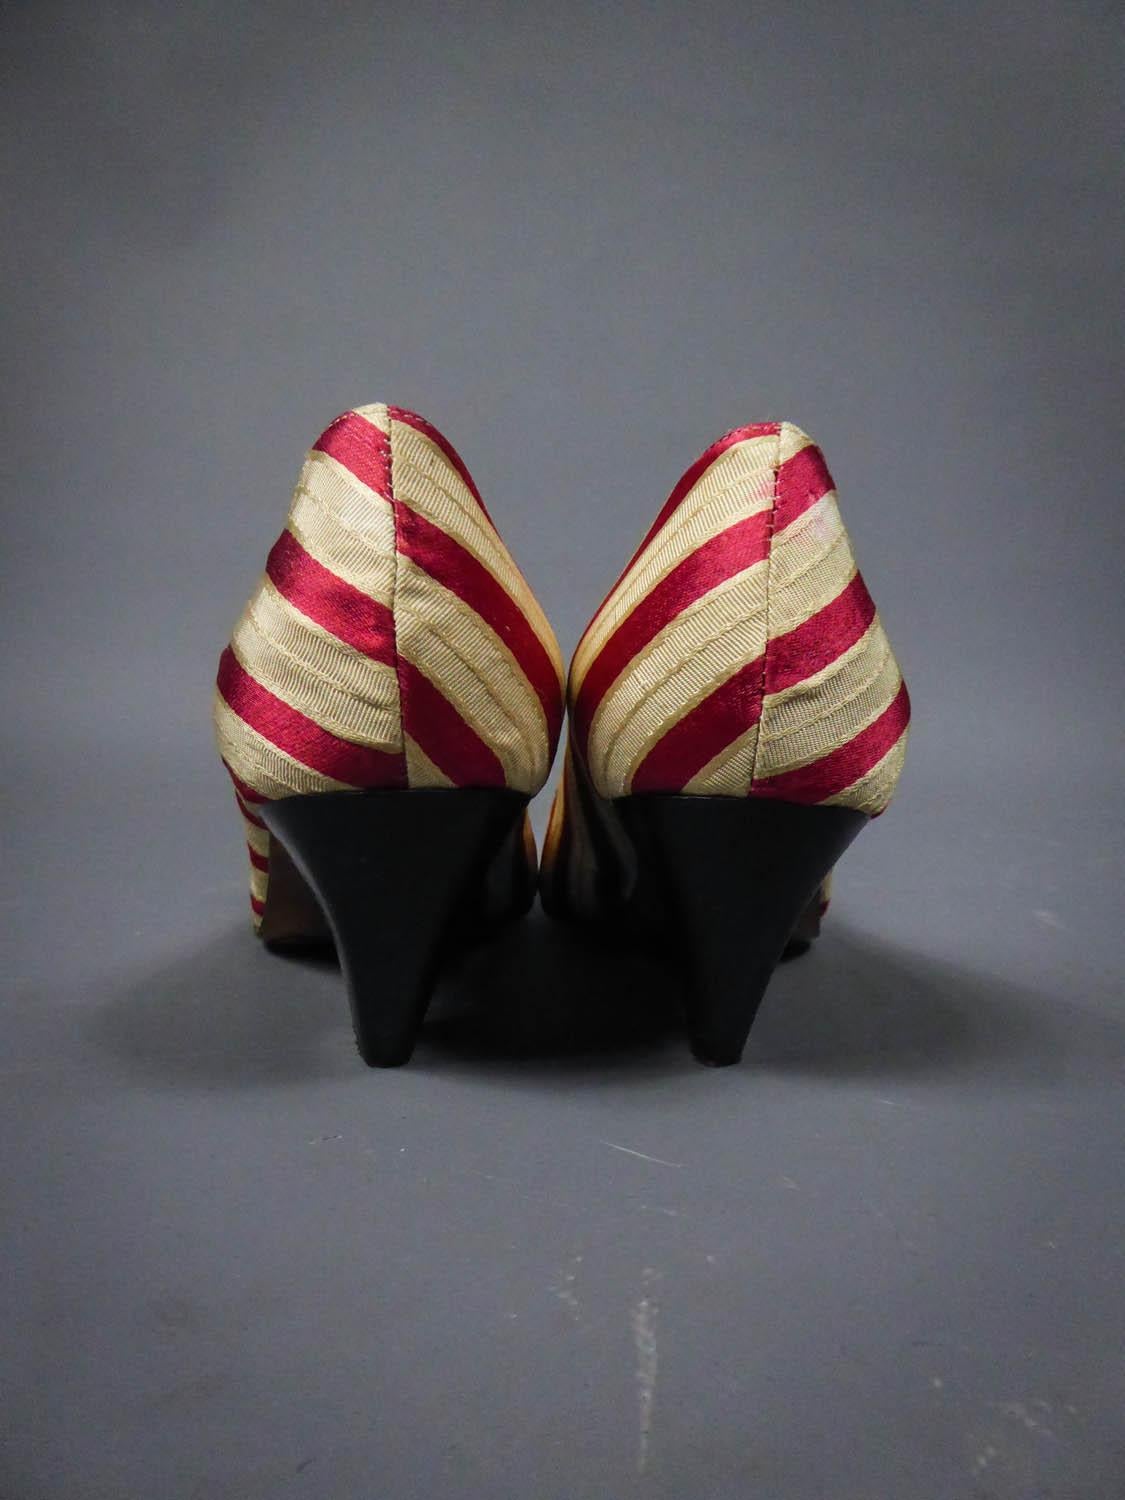 Brown Numbered Fonteneau French Heels Shoes Titled Moi, Mes Souliers Circa 1960